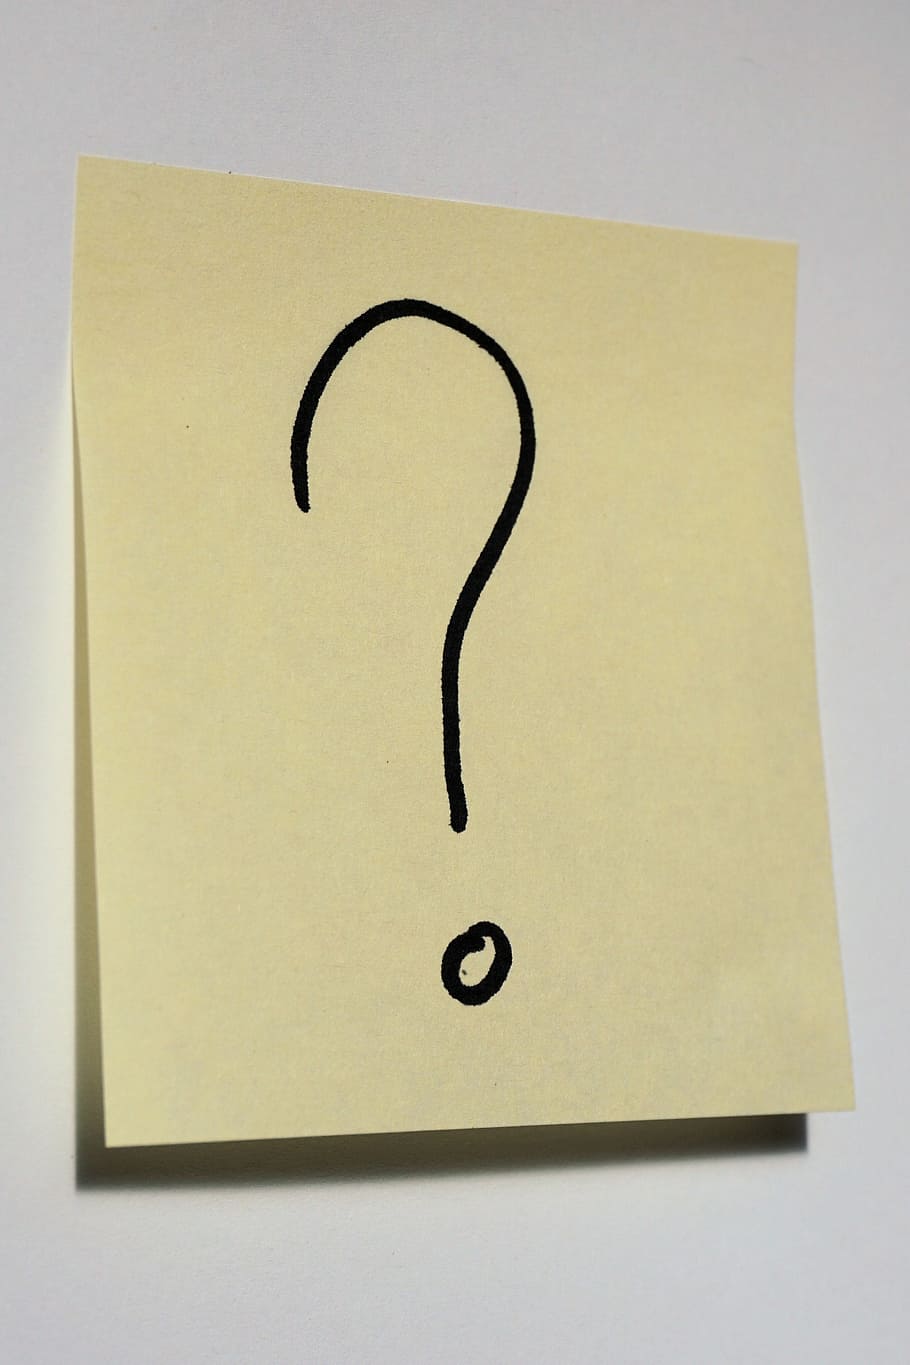 question mark, yellow, paper, Post It, List, Note, Adhesive, memo, adhesive note, office